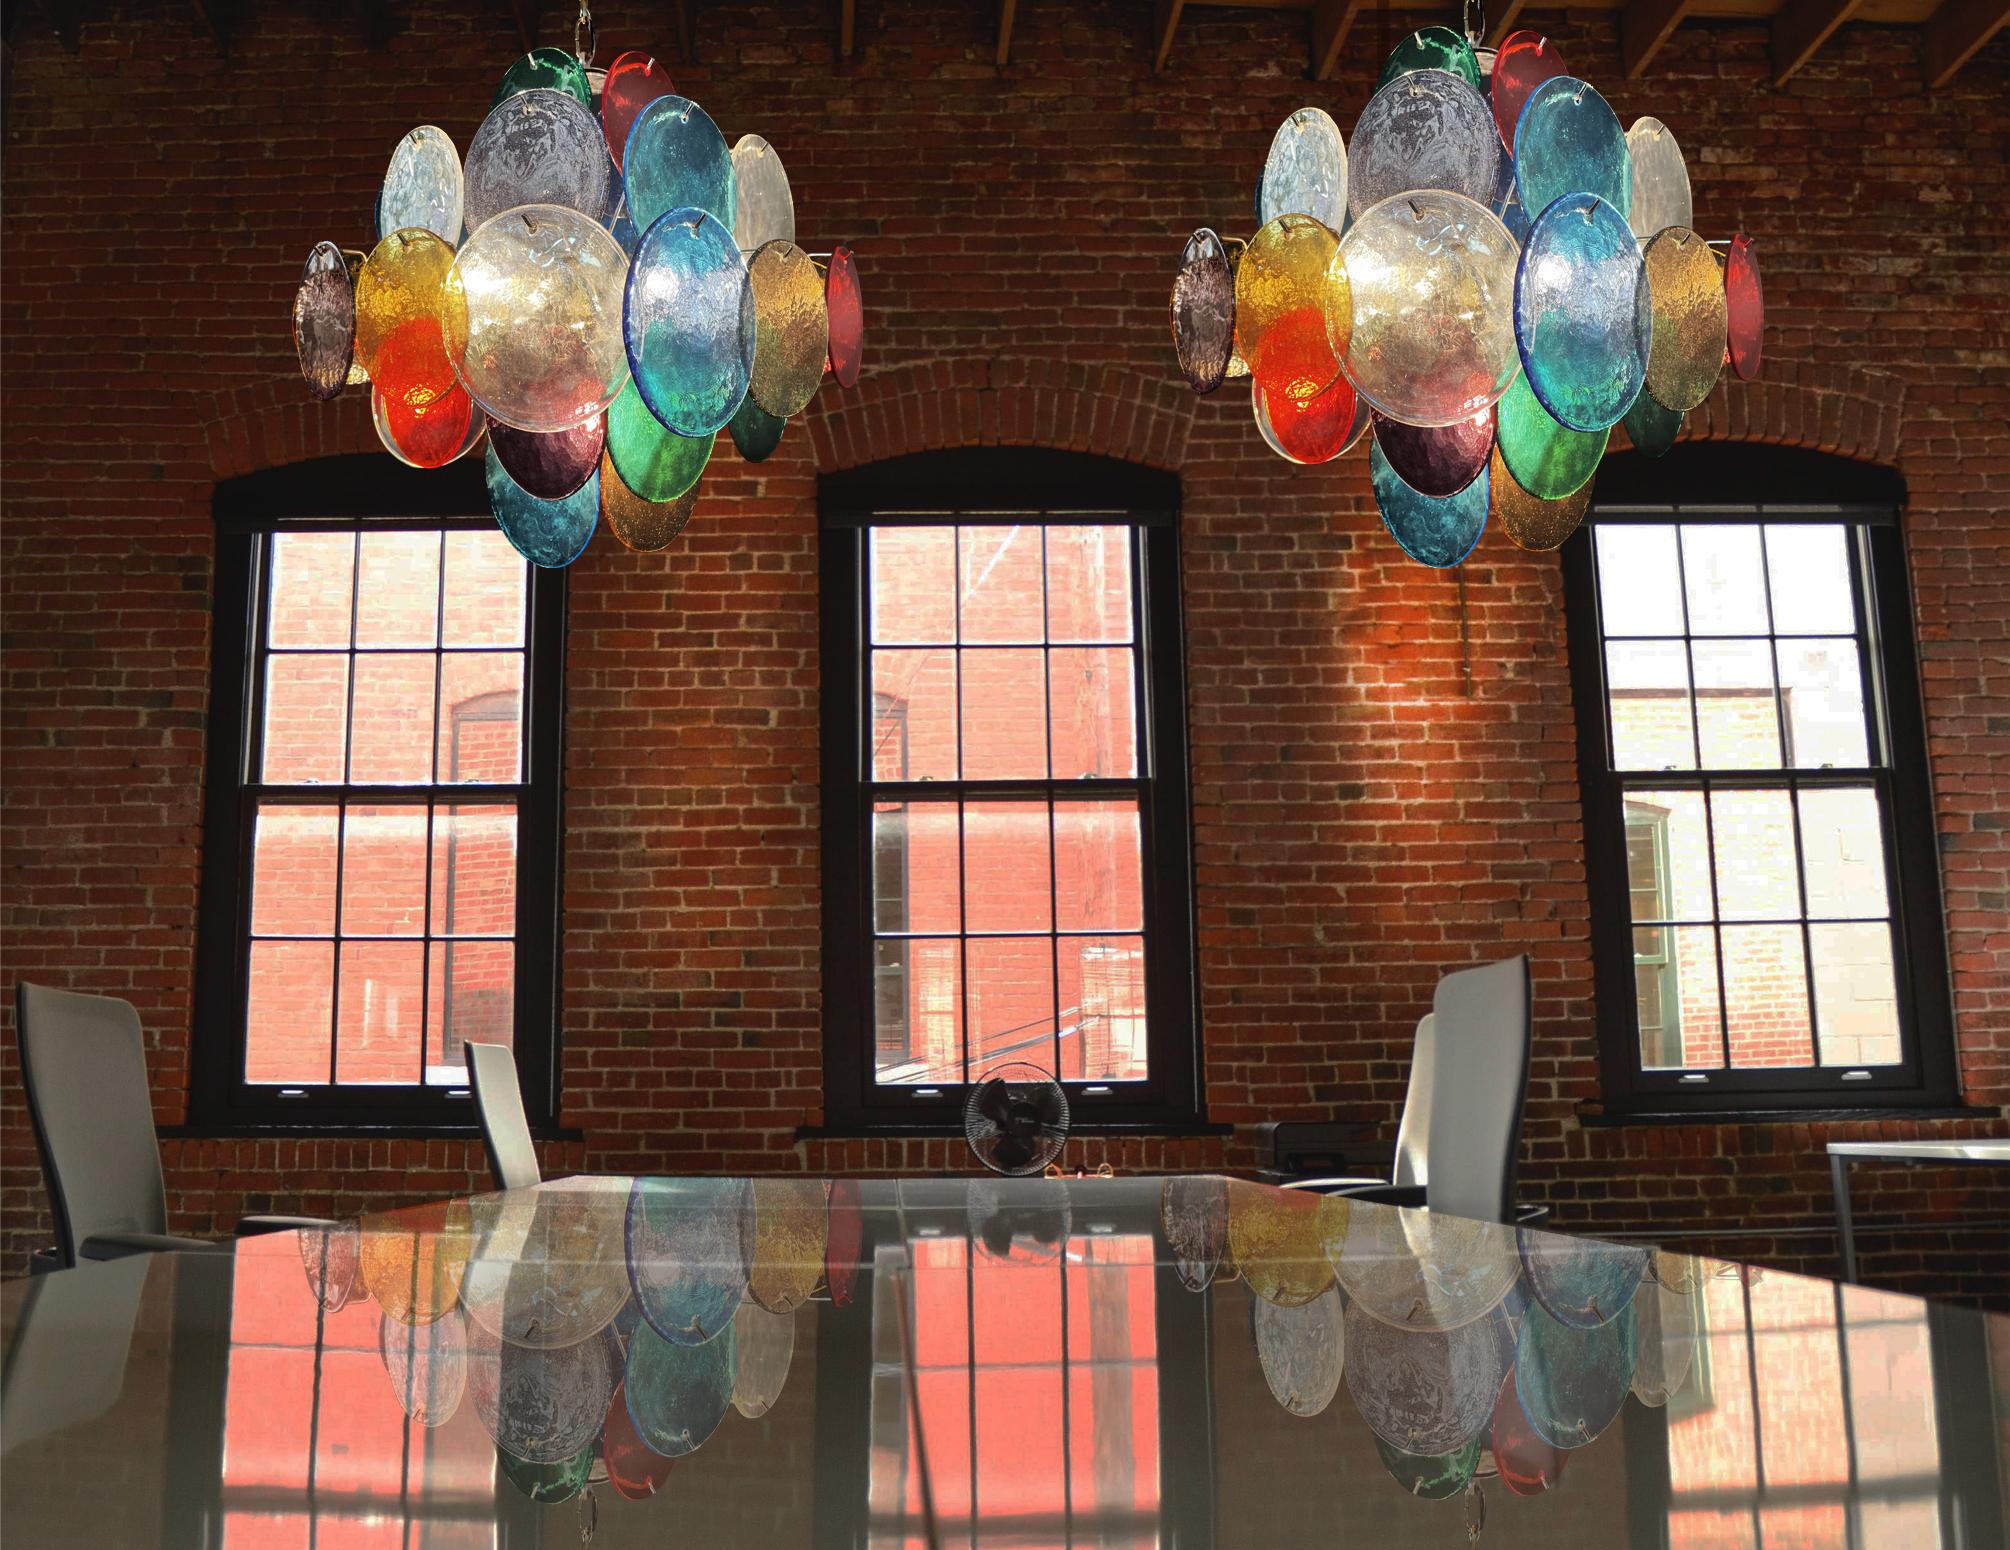 Pair Vintage Italian Murano chandeliers in Vistosi style. Each chandelier has 36 fantastic multicolored discs in a nickel metal frame.
Period: late XX century
Dimensions: 44,50 inches (150 cm) height with chain; 19,40 inches (50 cm) height without